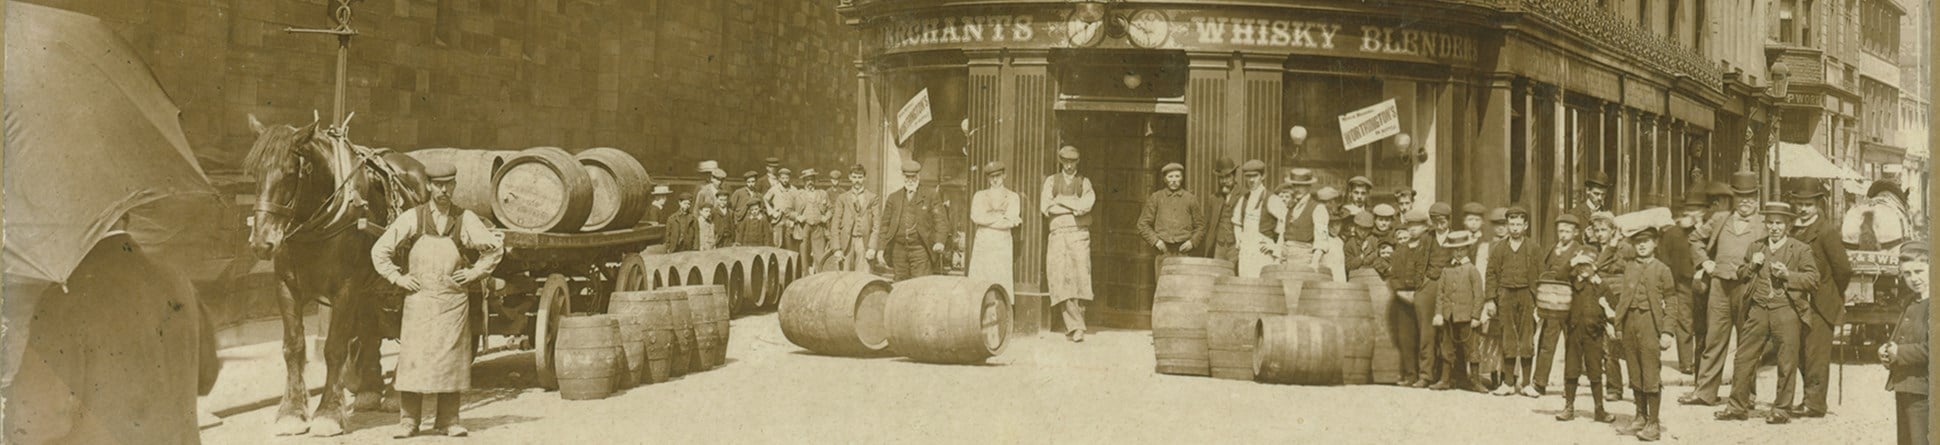 Exterior of the Spirit Vaults public house (later renamed Carlistle Arms) with a delivery of barrels being unloaded from a horse-drawn wagon.